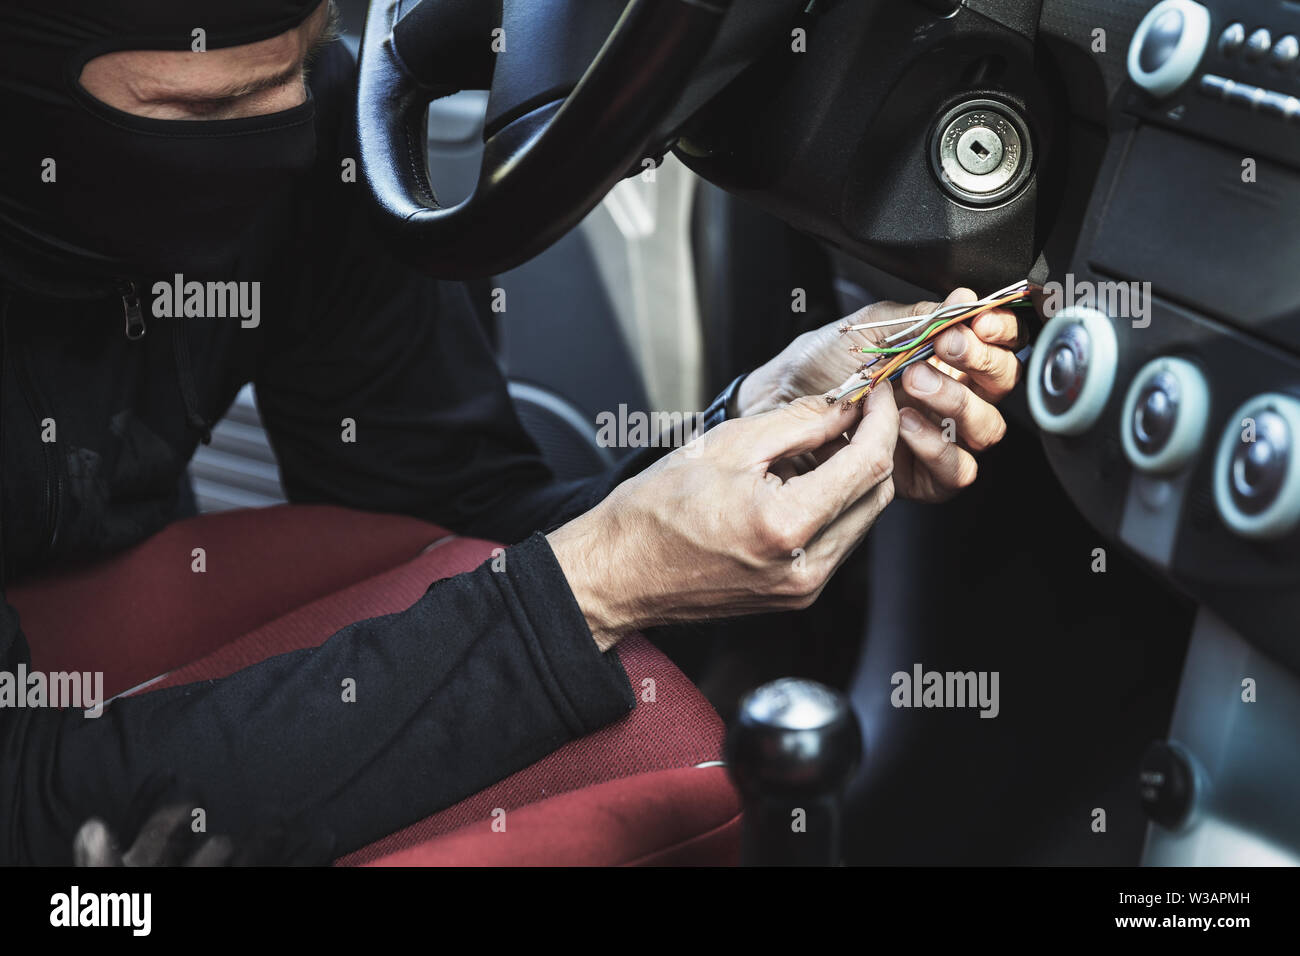 car hotwire - thief try to steal a vehicle by connecting ignition wires Stock Photo